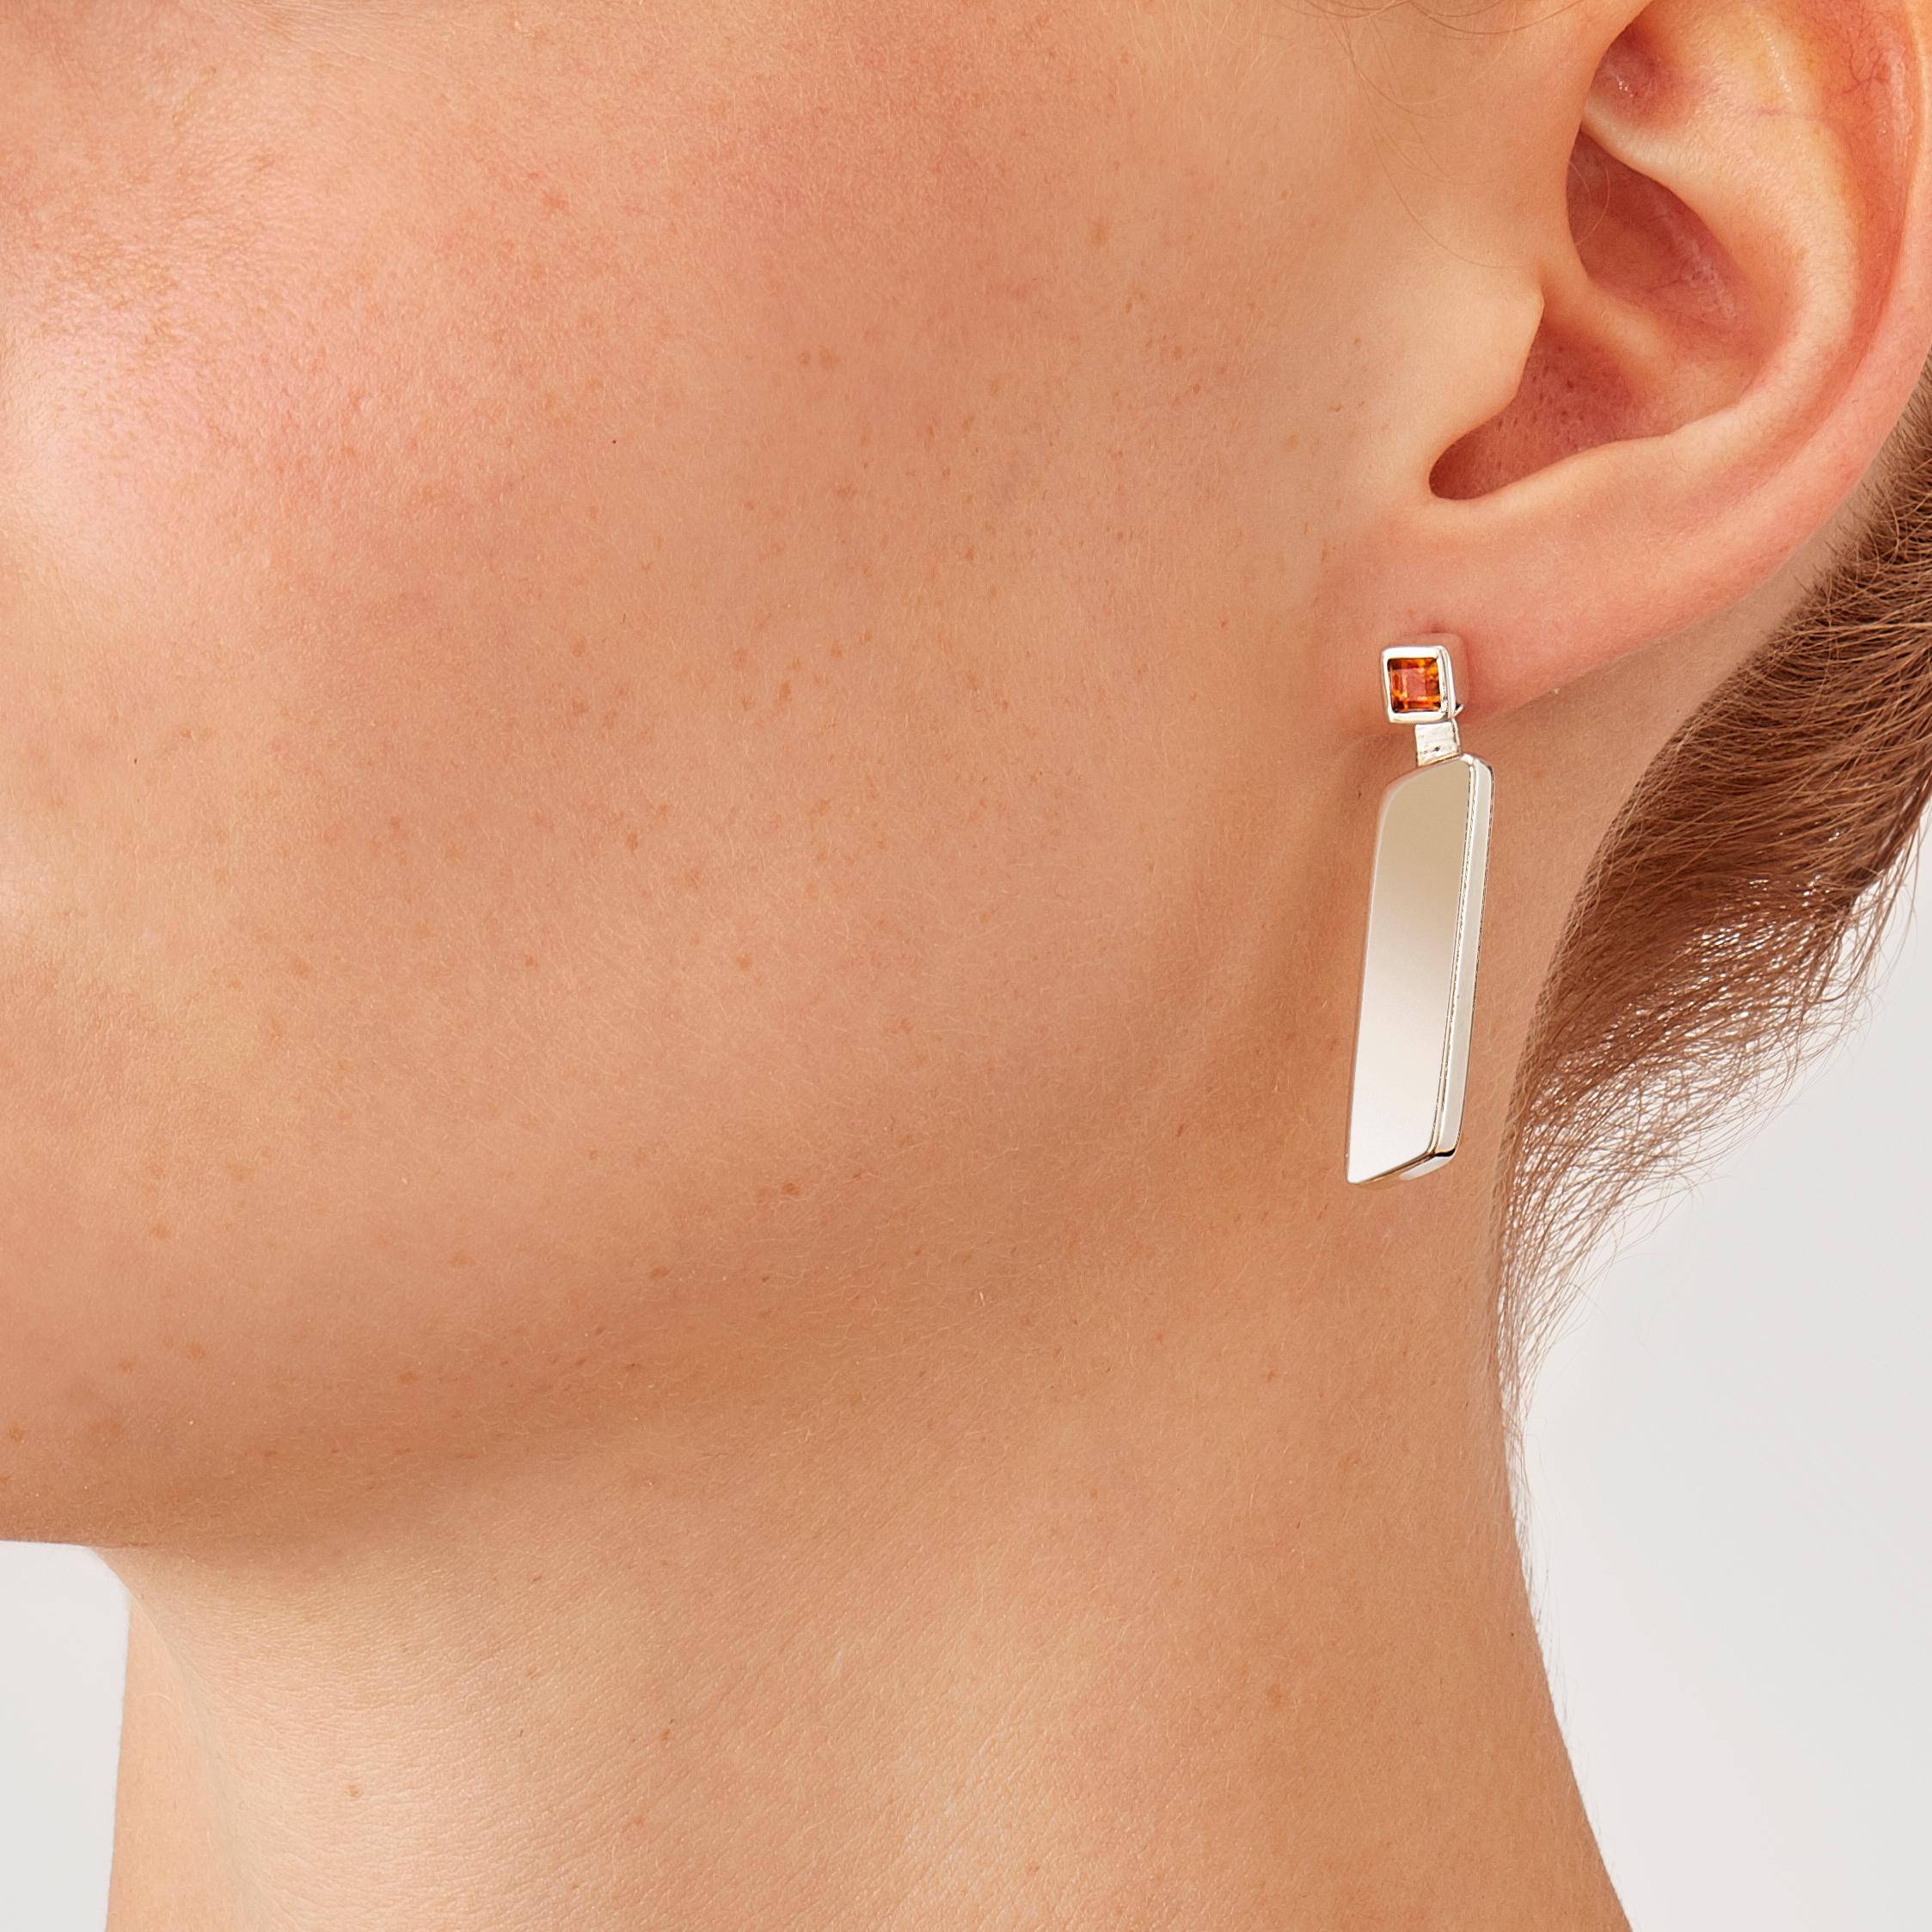 Made by hand in Nathalie Jean's Milan atelier in limited edition, the Saphir Absolu drop Earrings are composed of light hollow geometric volumes with rounded edges, in sterling silver and citrine quartz. Clever hidden links allow the pieces to